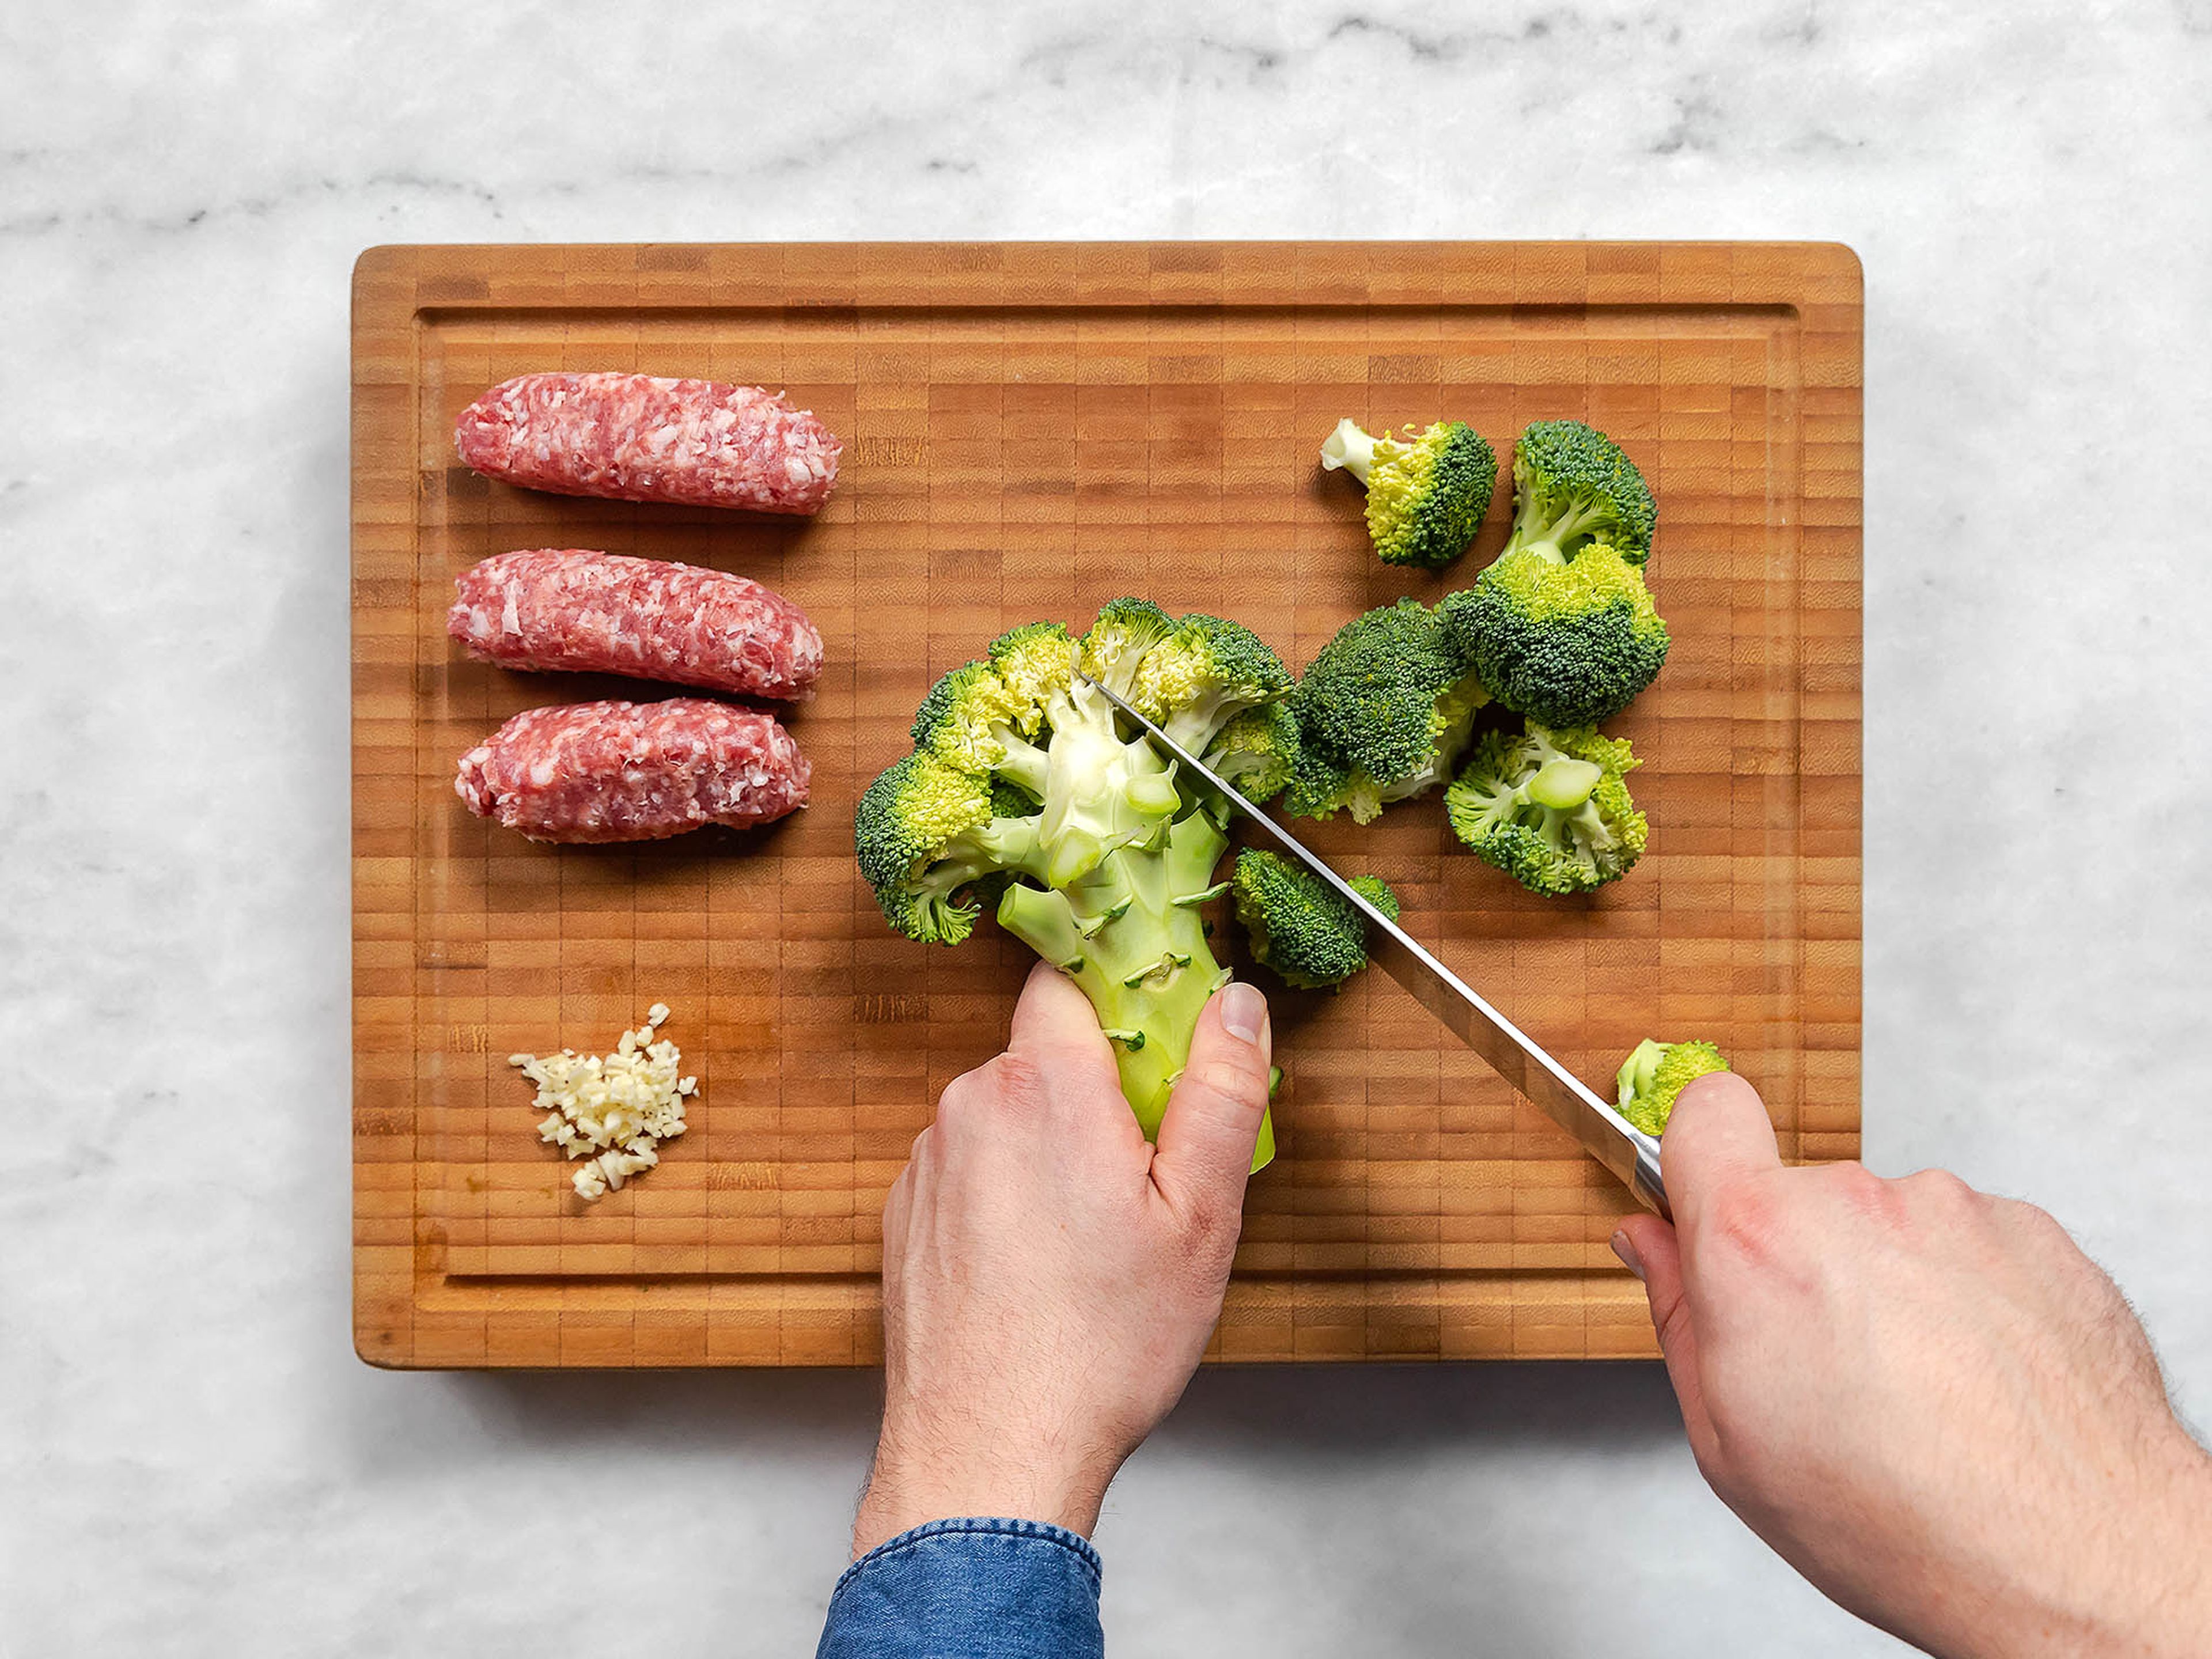 Cut broccoli into small florets. Remove the casings from the sausage and chop. Finely slice garlic.